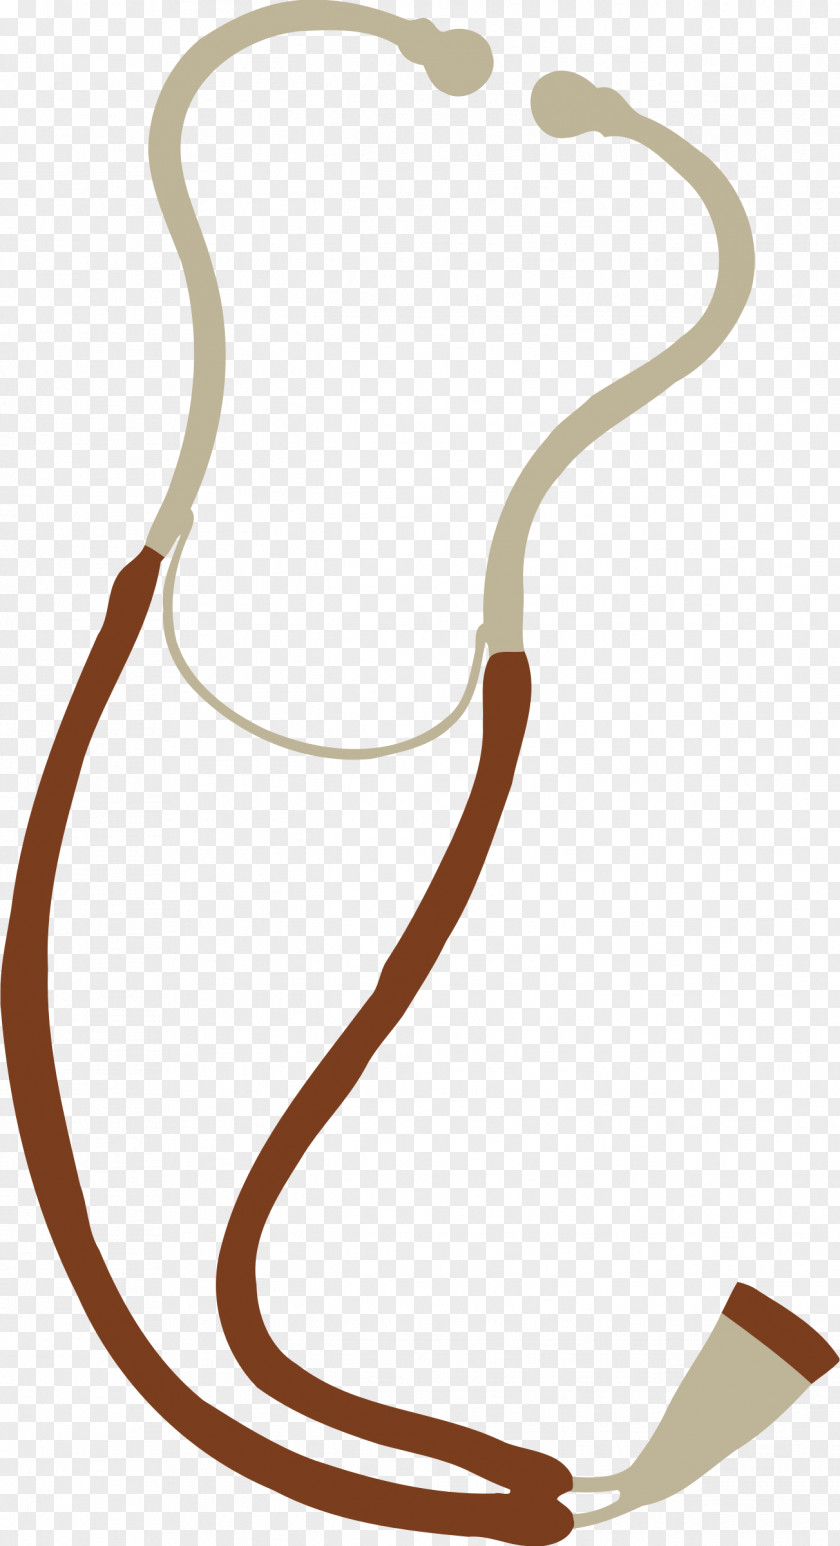 Goods Stethoscope Clip Art PNG